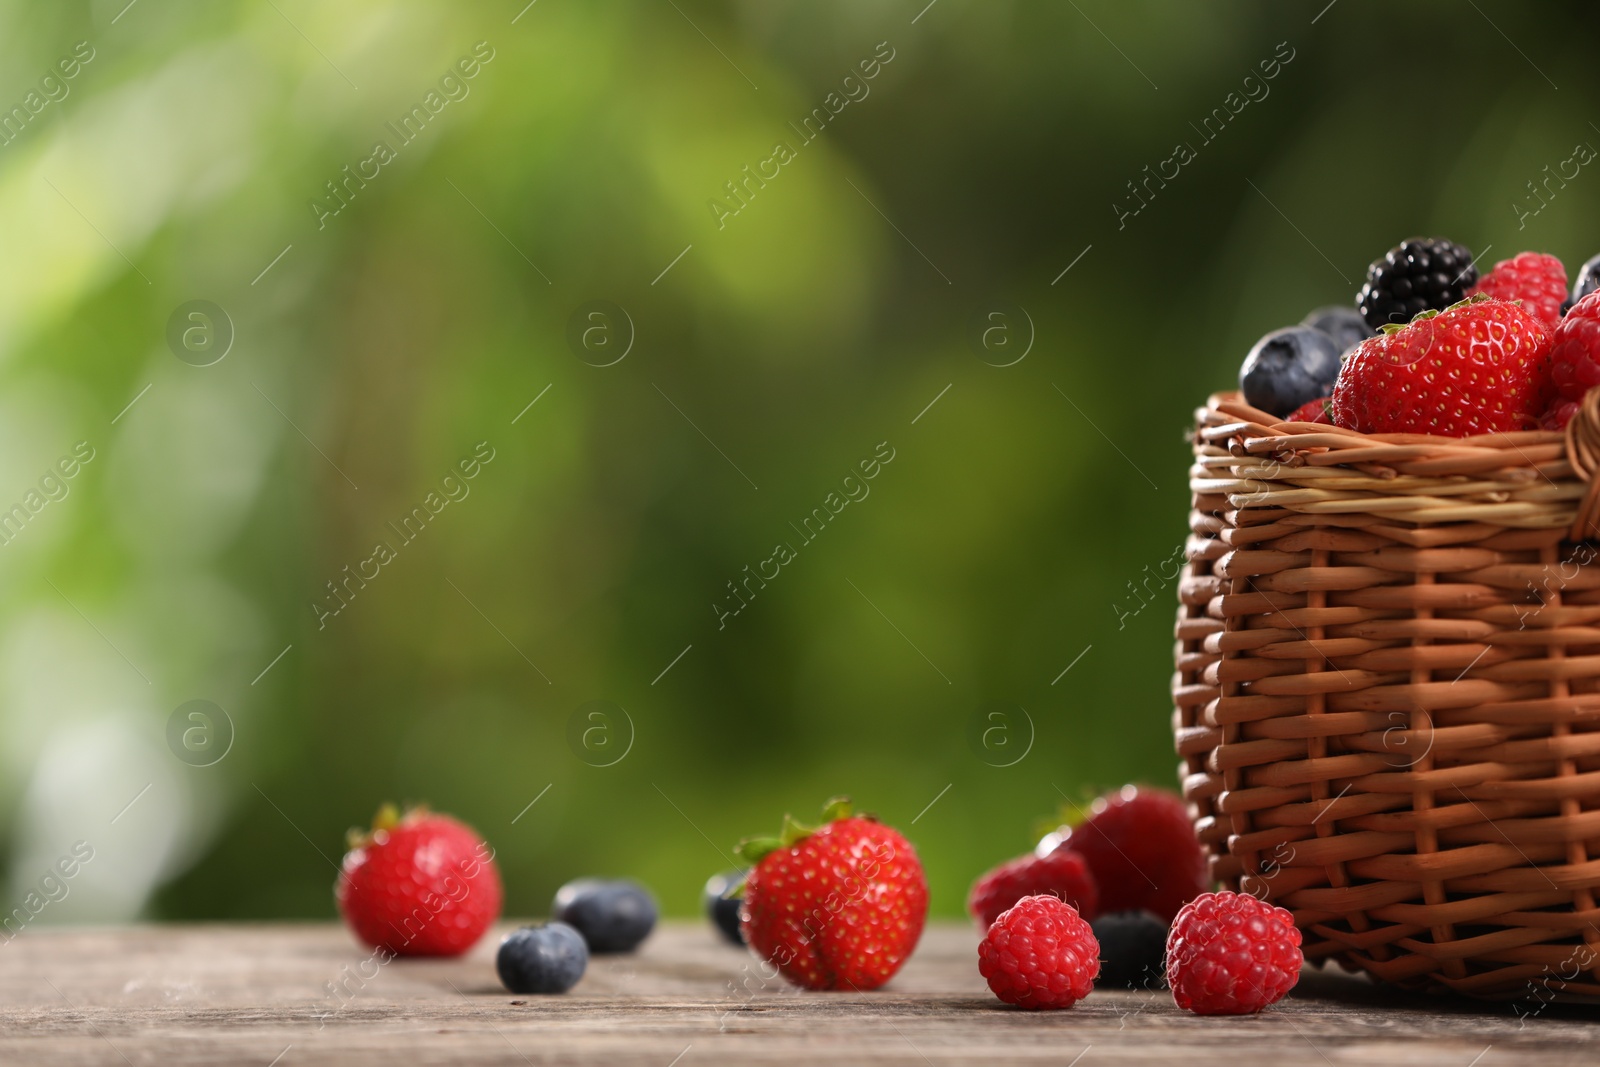 Photo of Wicker basket with different fresh ripe berries on wooden table outdoors, space for text